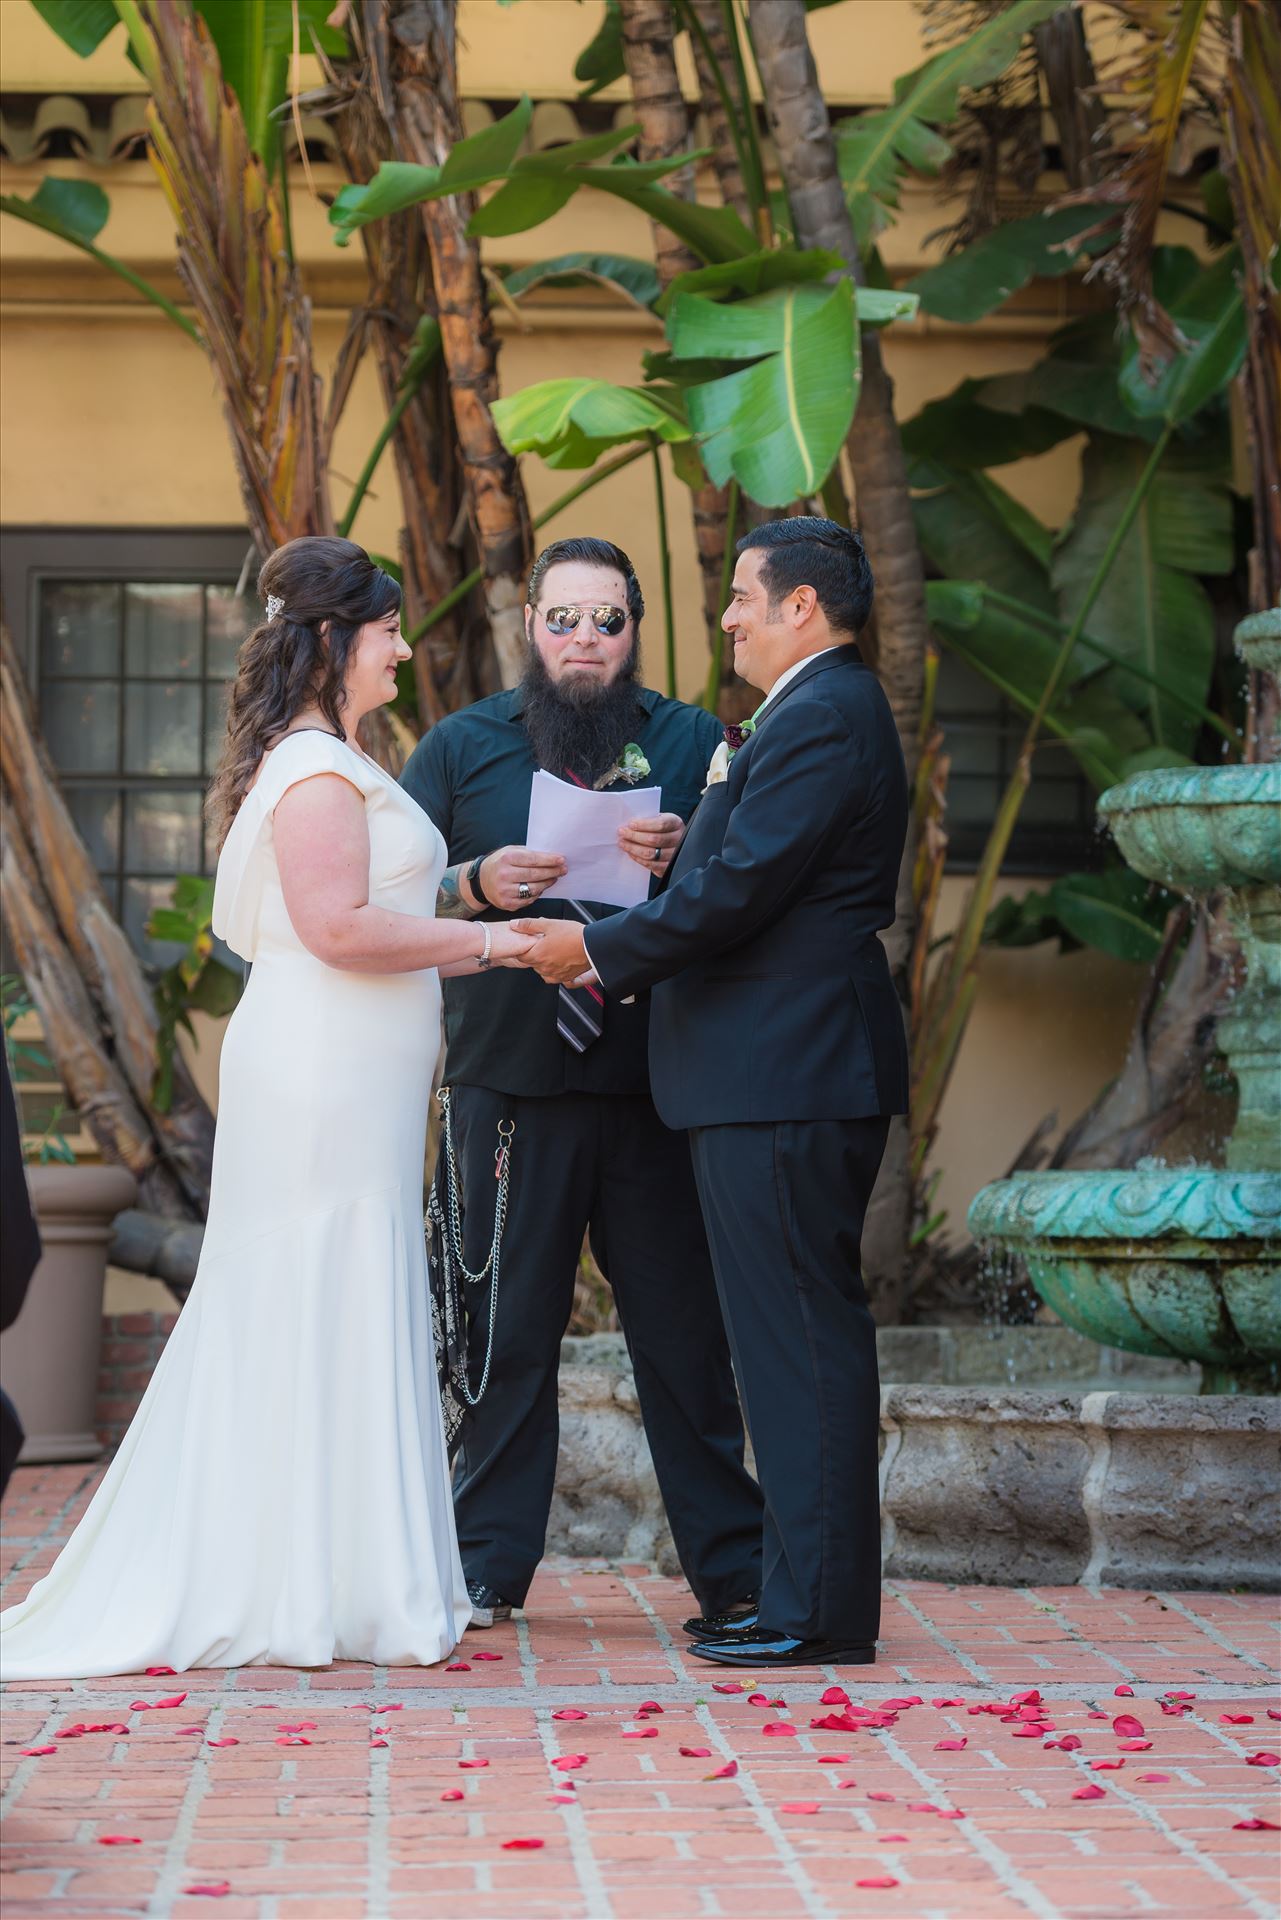 Mary and Alejandro 29 Wedding photography at the Historic Santa Maria Inn in Santa Maria, California by Mirror's Edge Photography. Bride and Groom exchange rings in courtyard by Sarah Williams